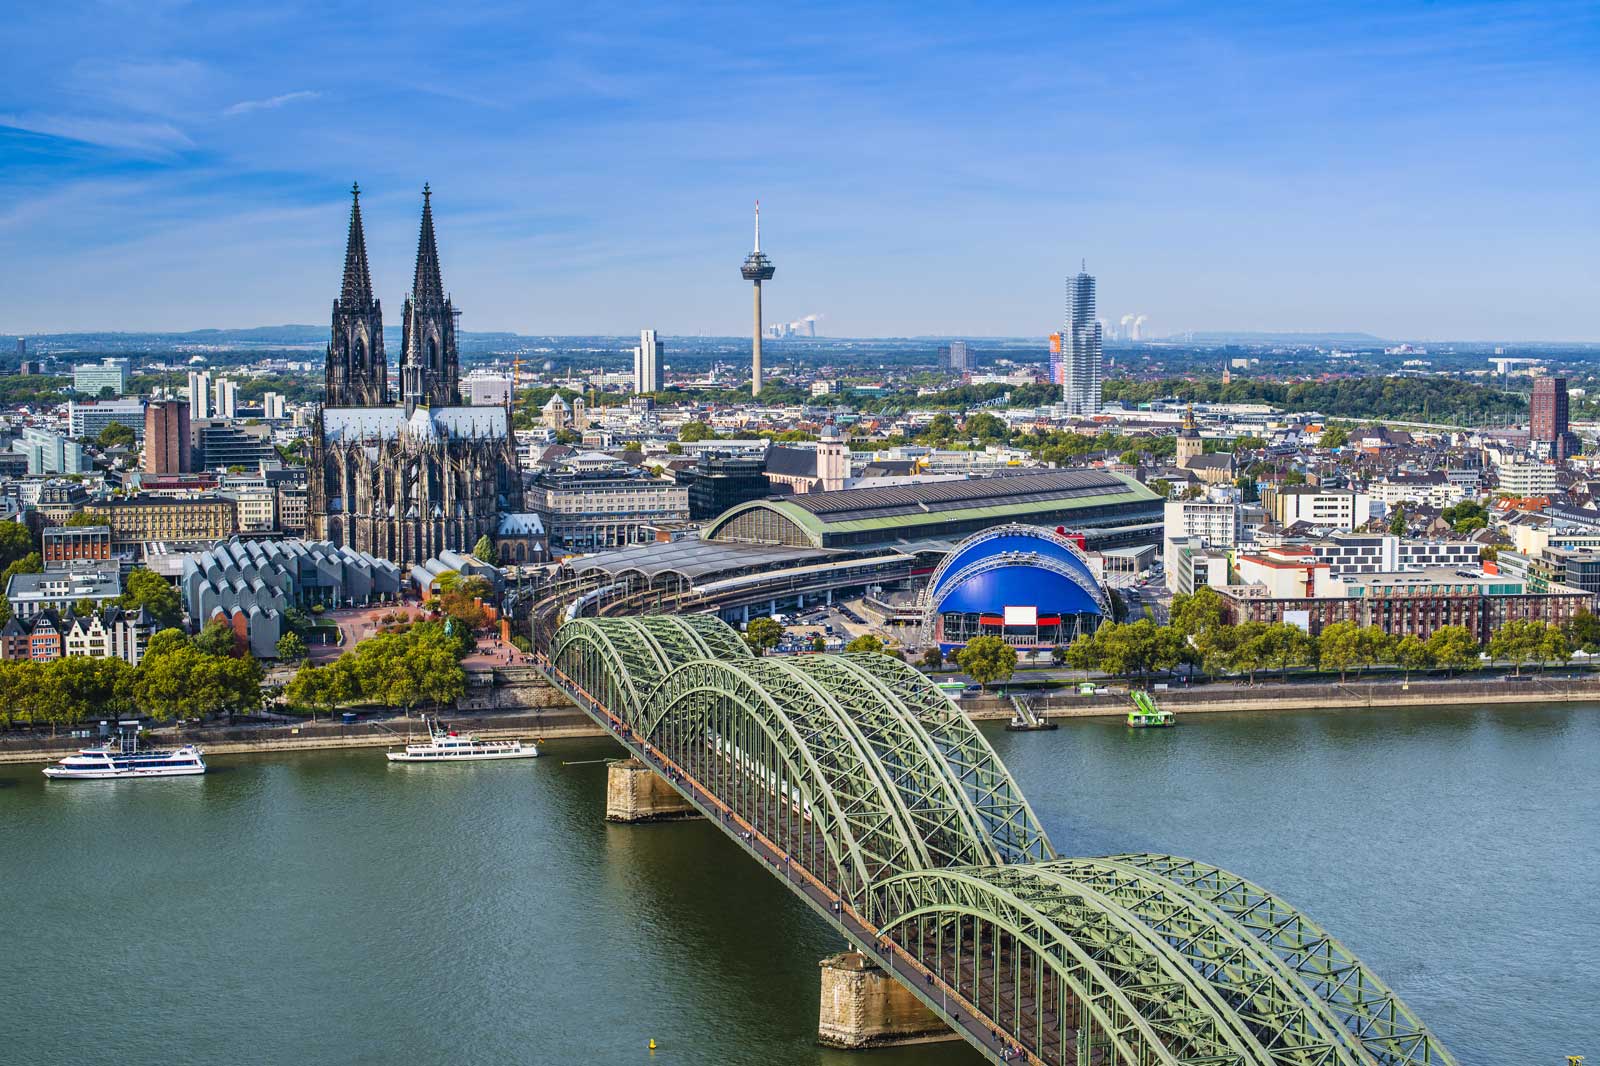 Cologne: view on the bridge, main train station, the Rhine and Dome